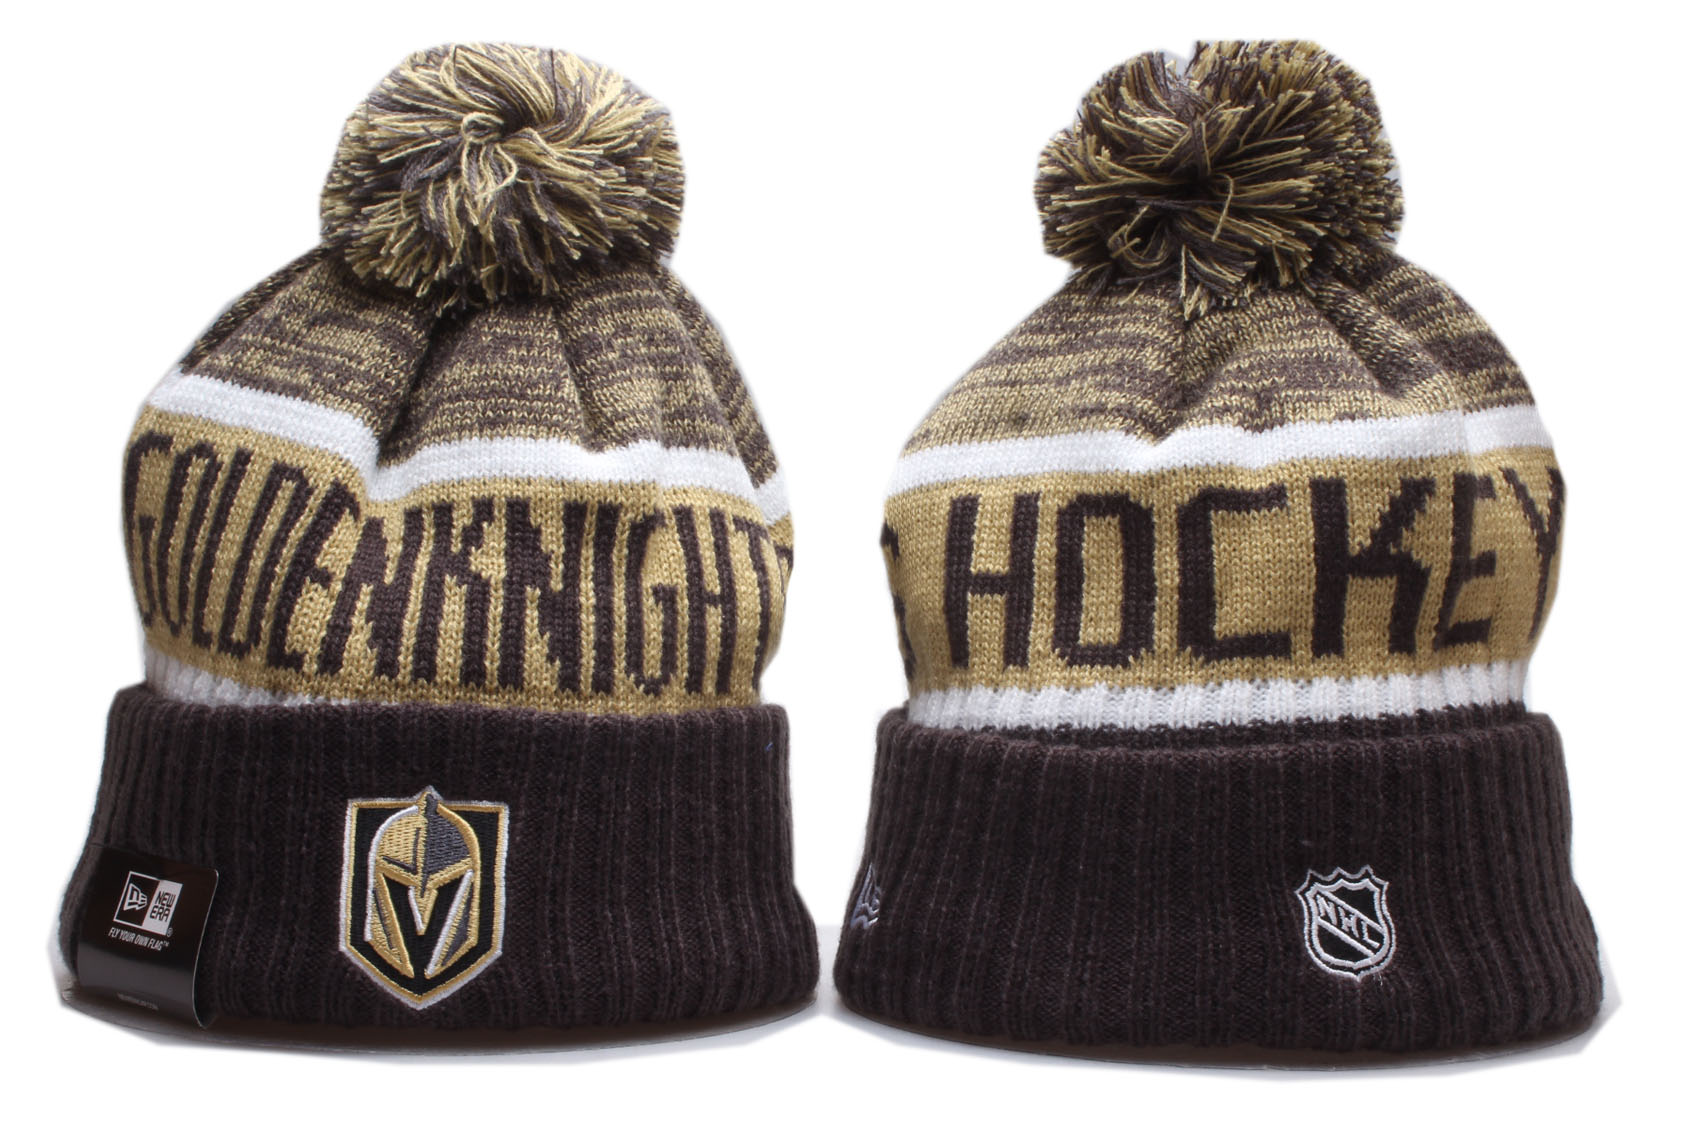 2020 NHL Vegas Golden Knights Beanies 1->los angeles lakers->NBA Jersey